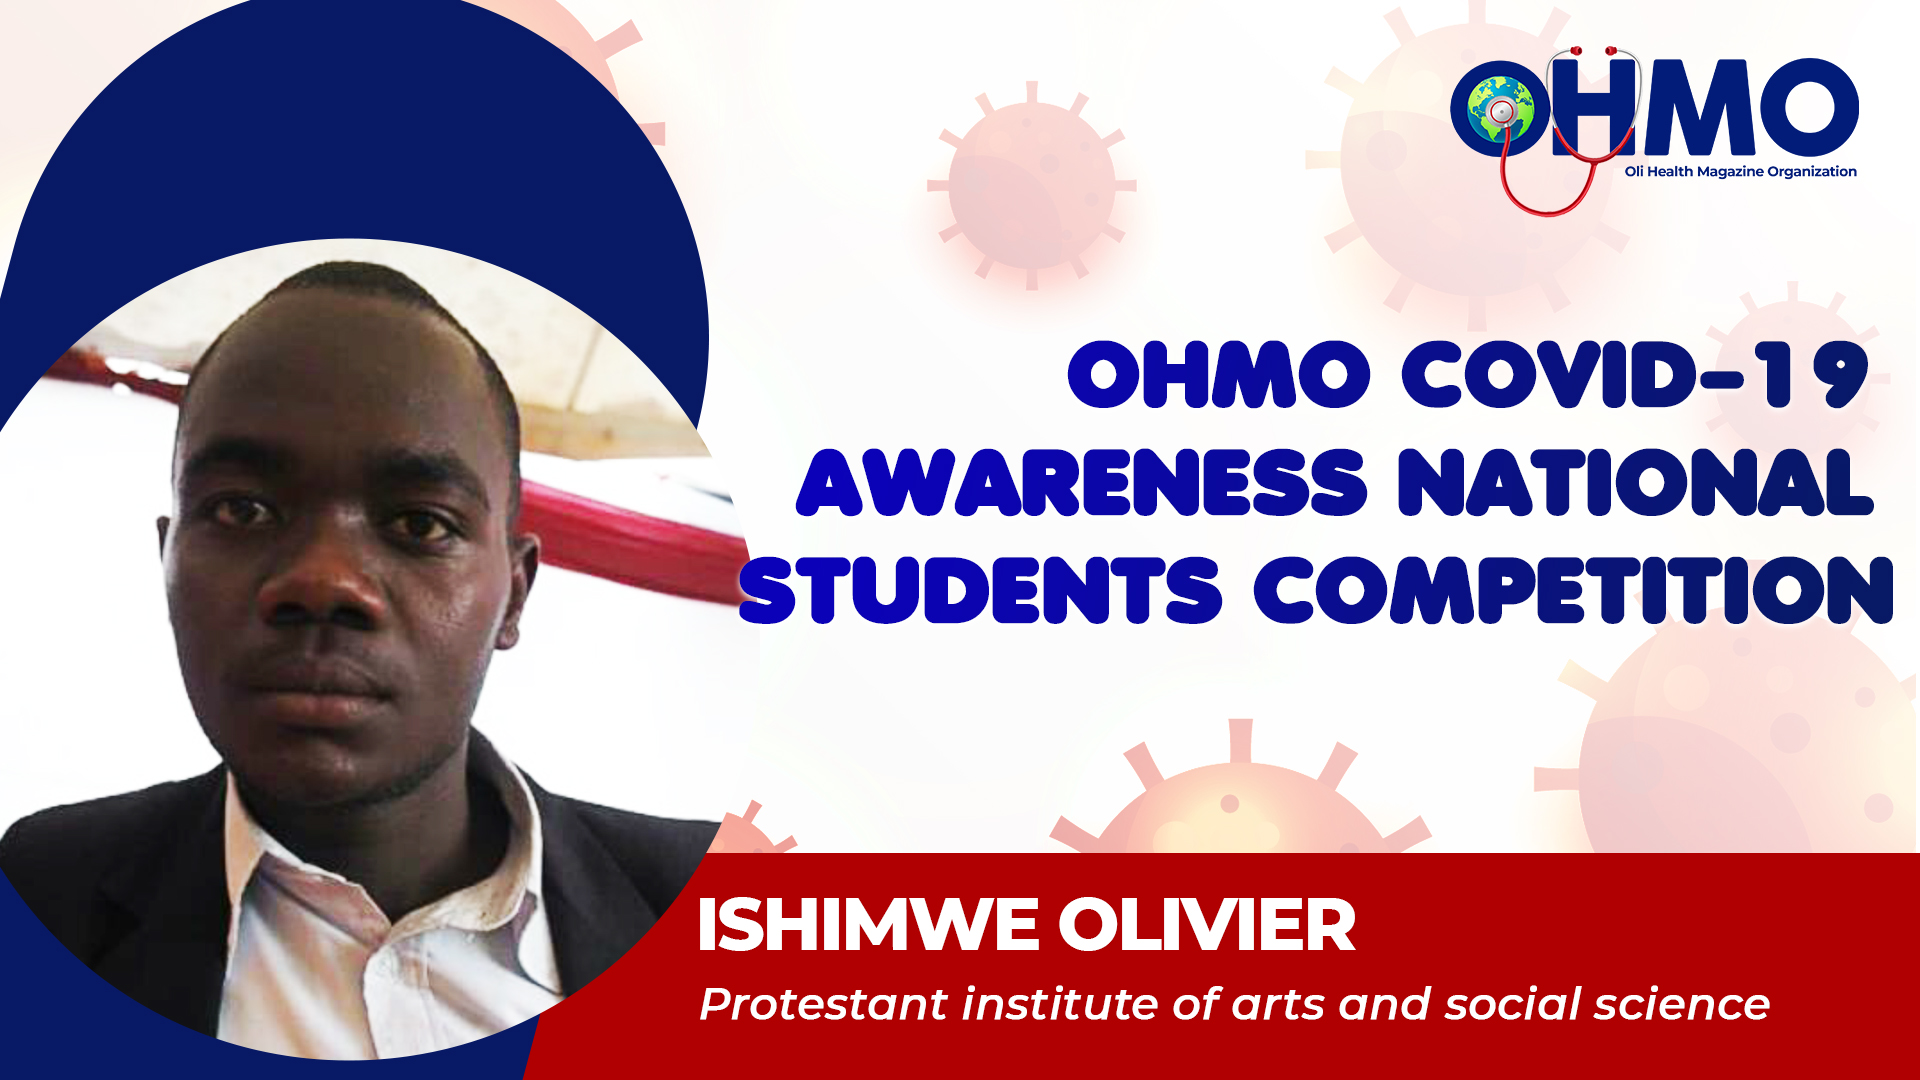 Coping with COVID-19 and Its Impact - Olivier ISHIMWE from Protestant Institute of Arts and Social Science (ENTRY 10)